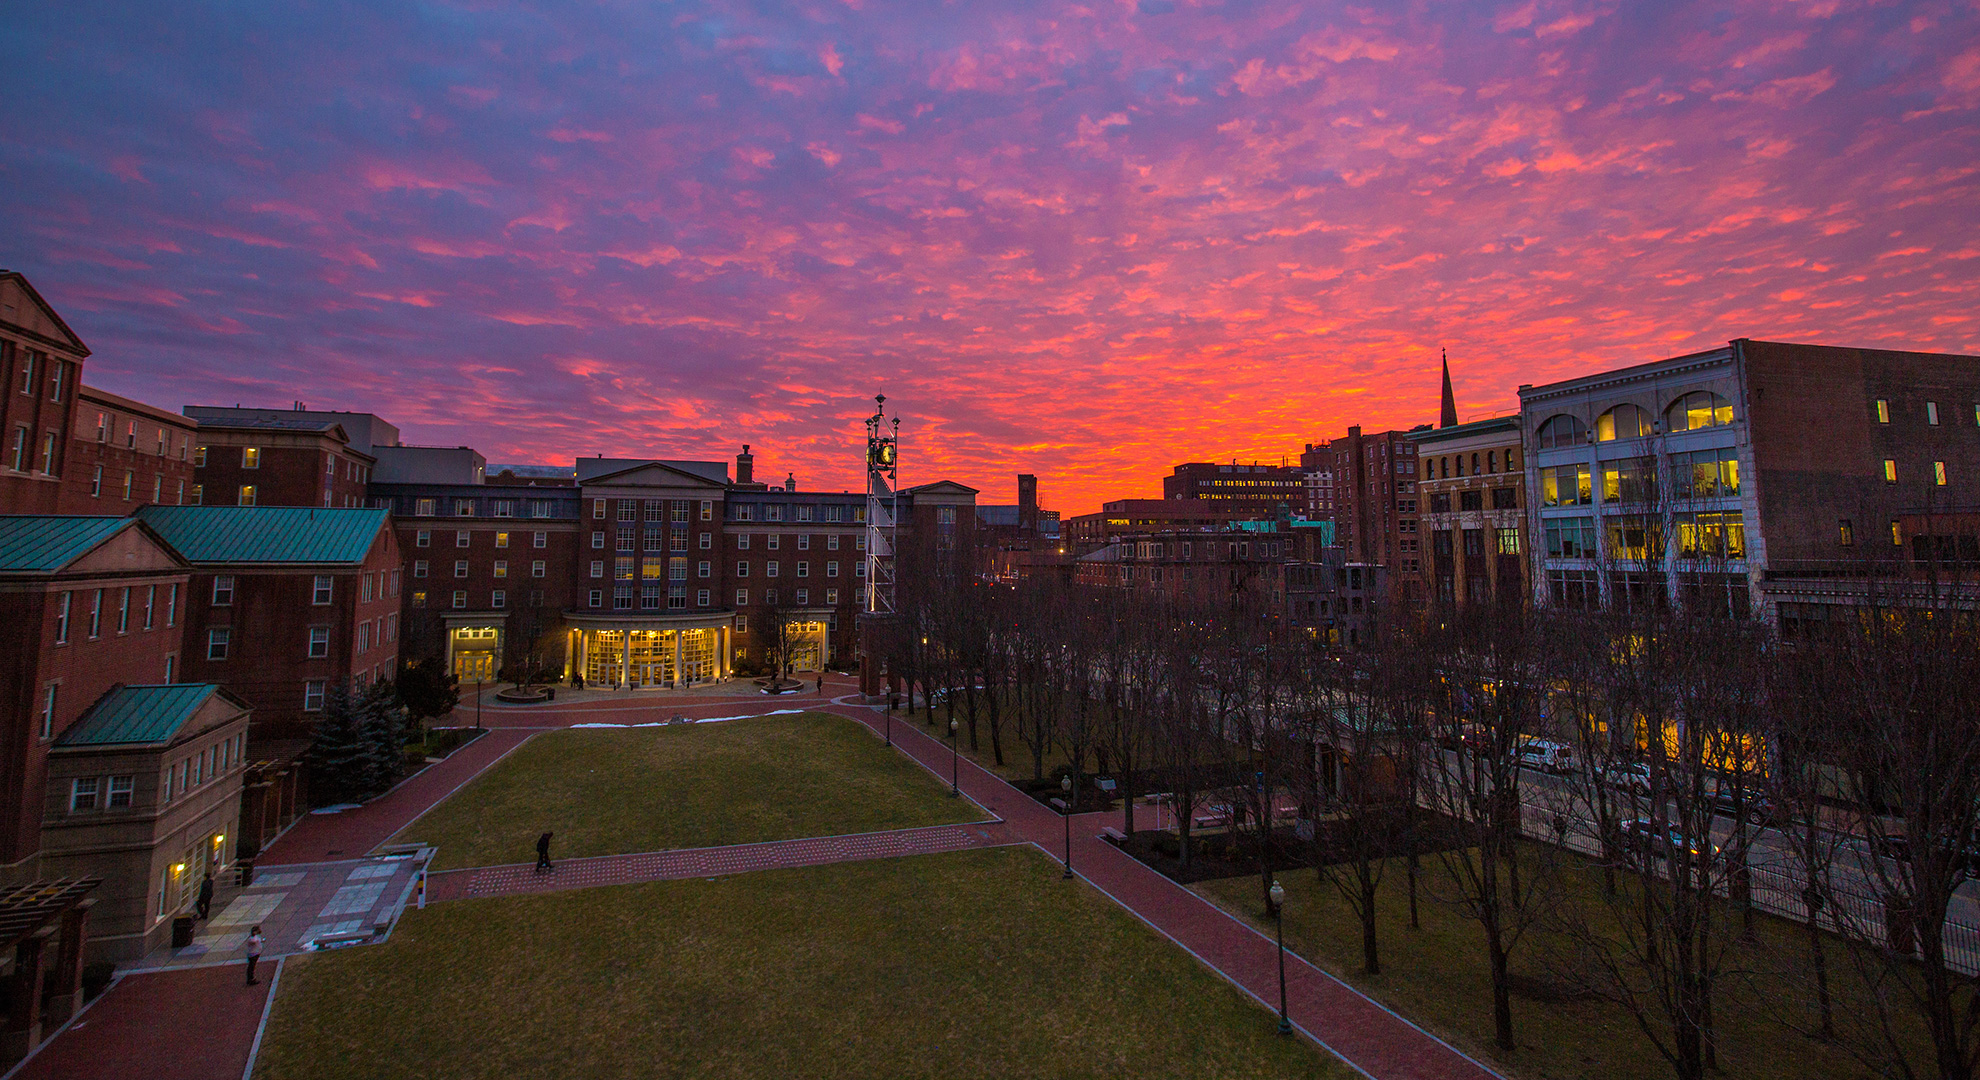 Aerial shot of Gaebe commons with a beautiful sunset in the background - purple pink and orange colors